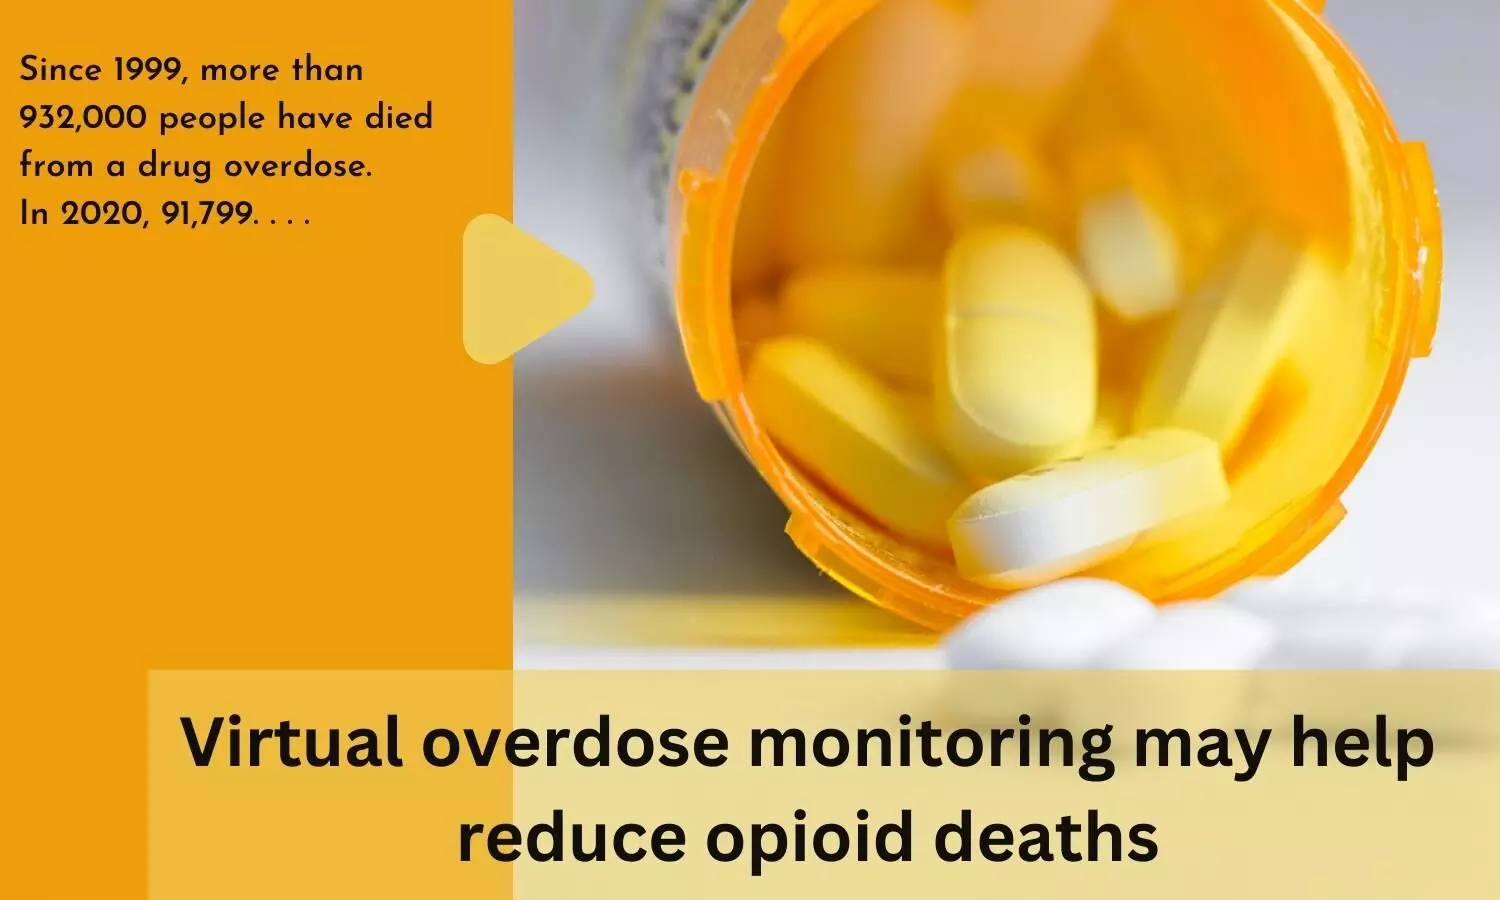 Virtual overdose monitoring may help reduce opioid deaths